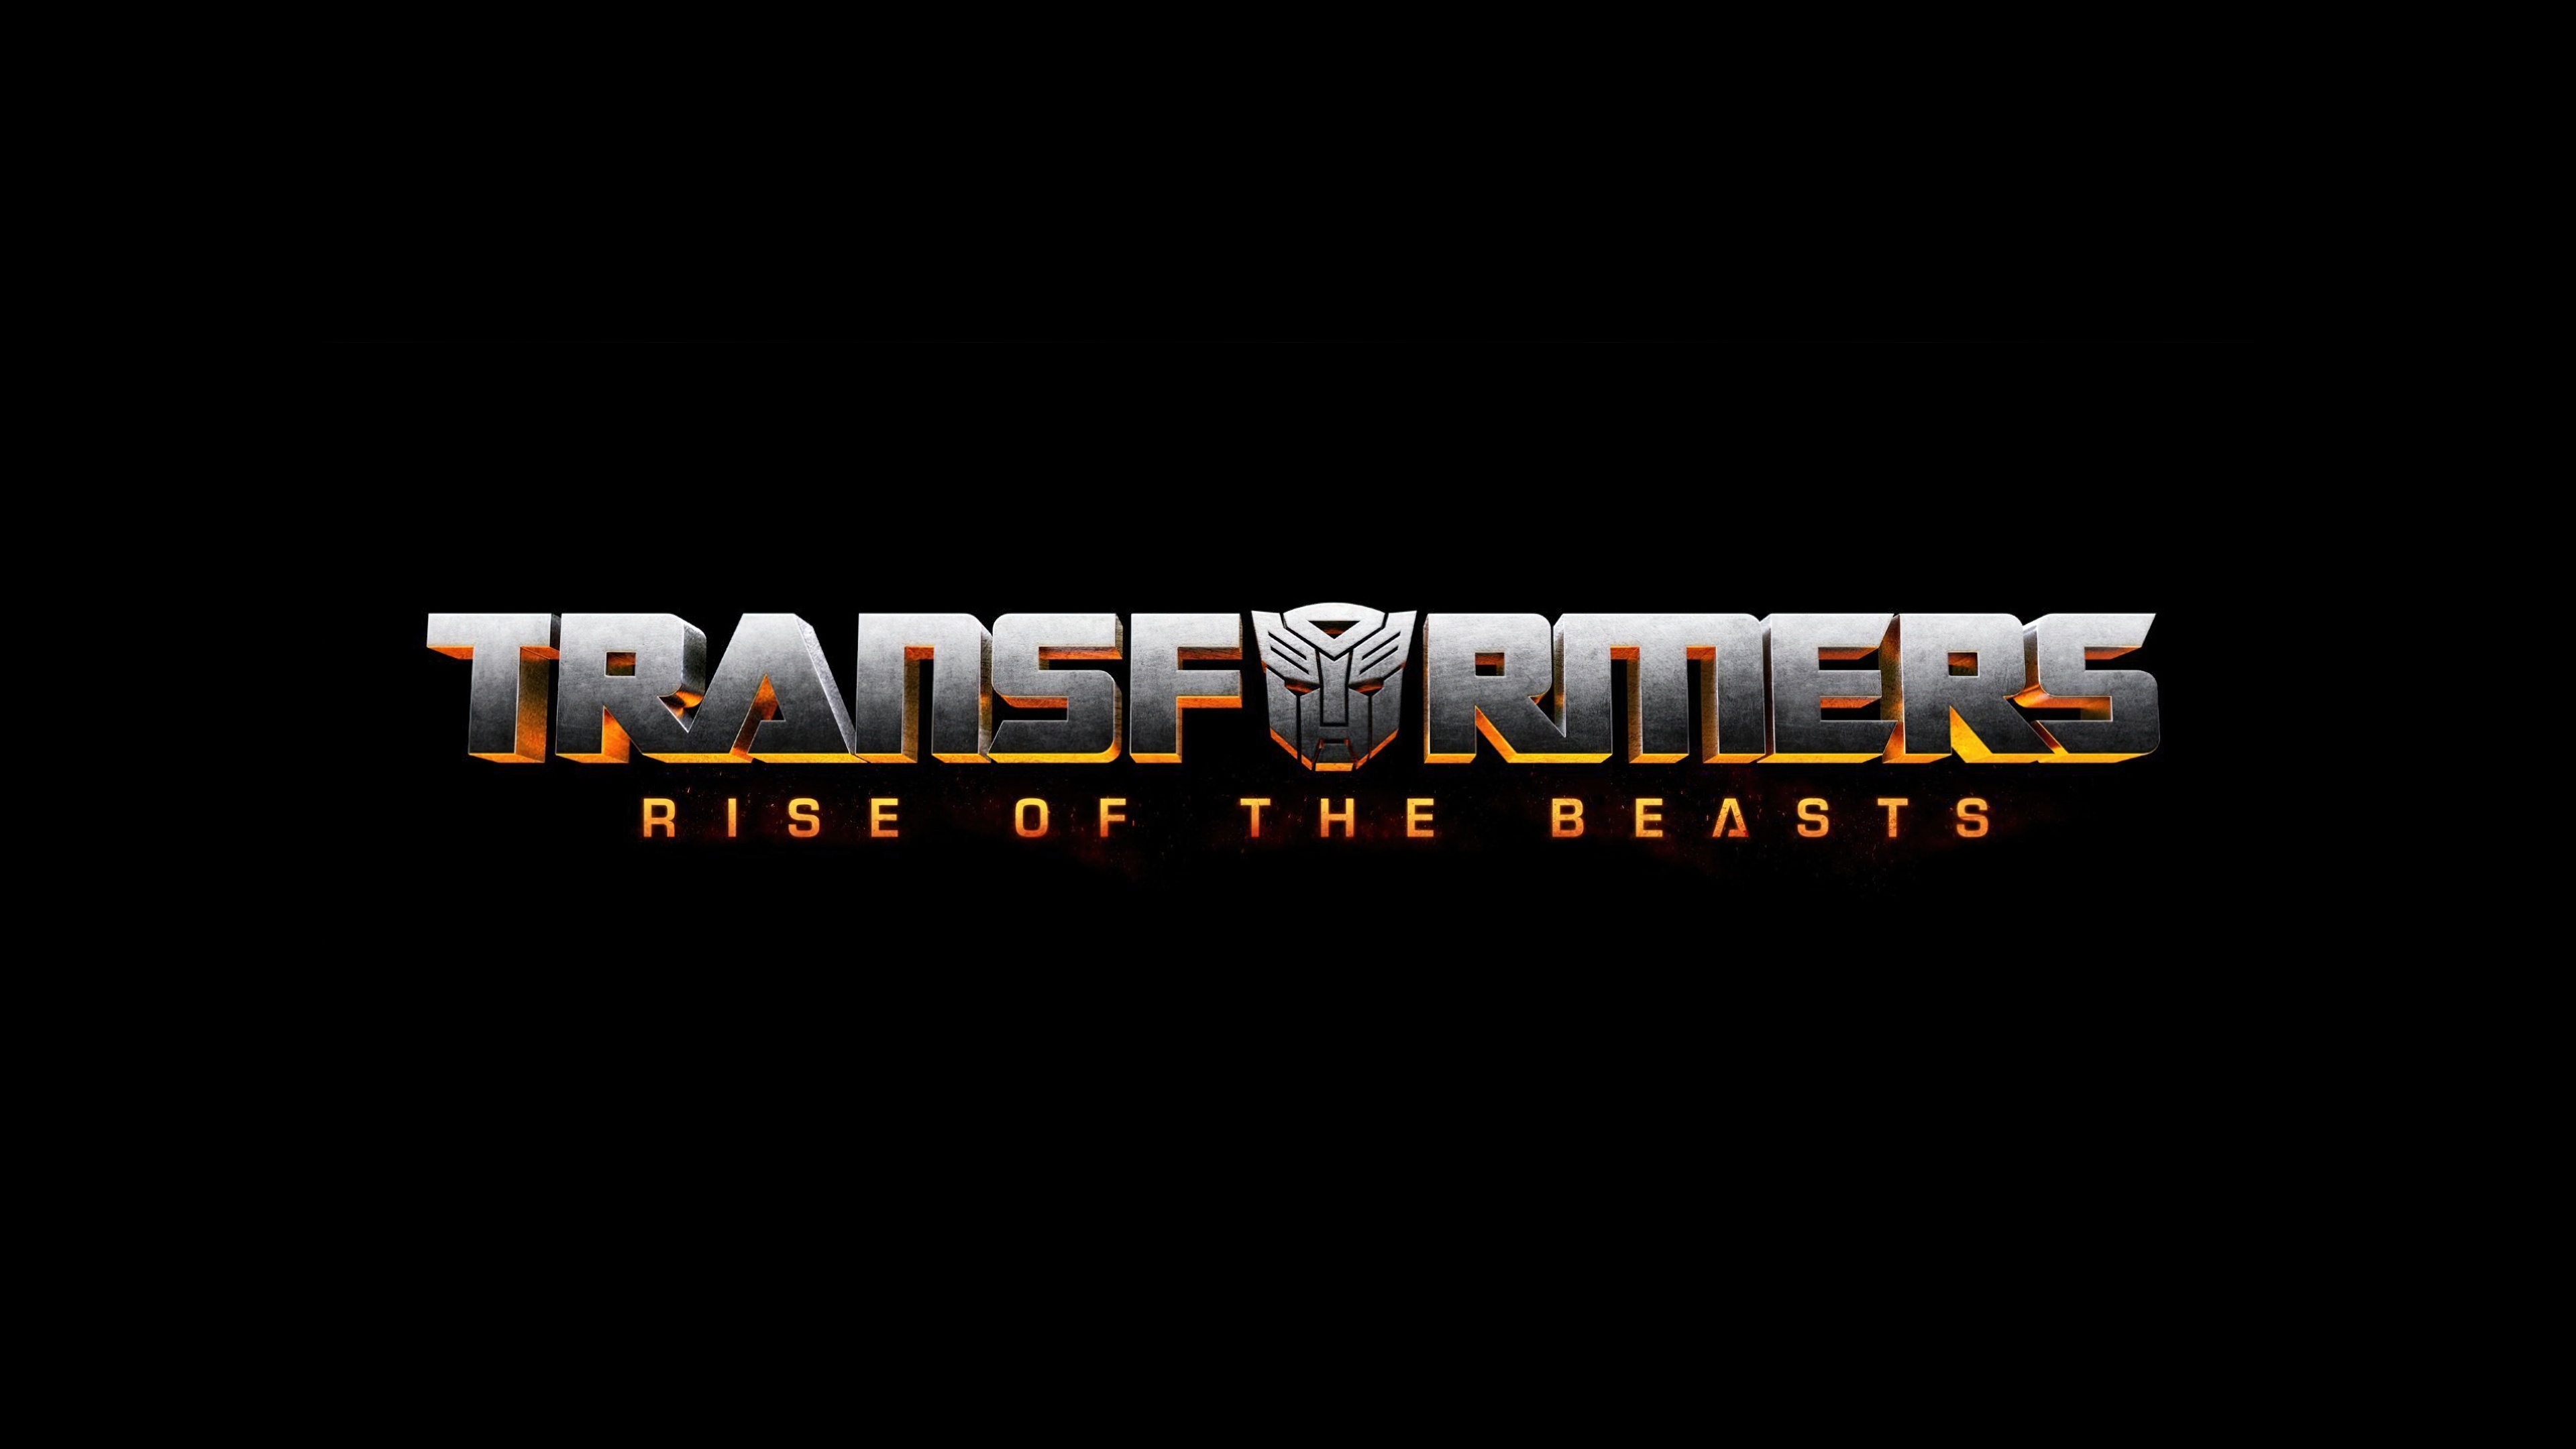 Transformers: Rise of the Beasts Wallpaper 4K, 2022 Movies, Sci-Fi ...